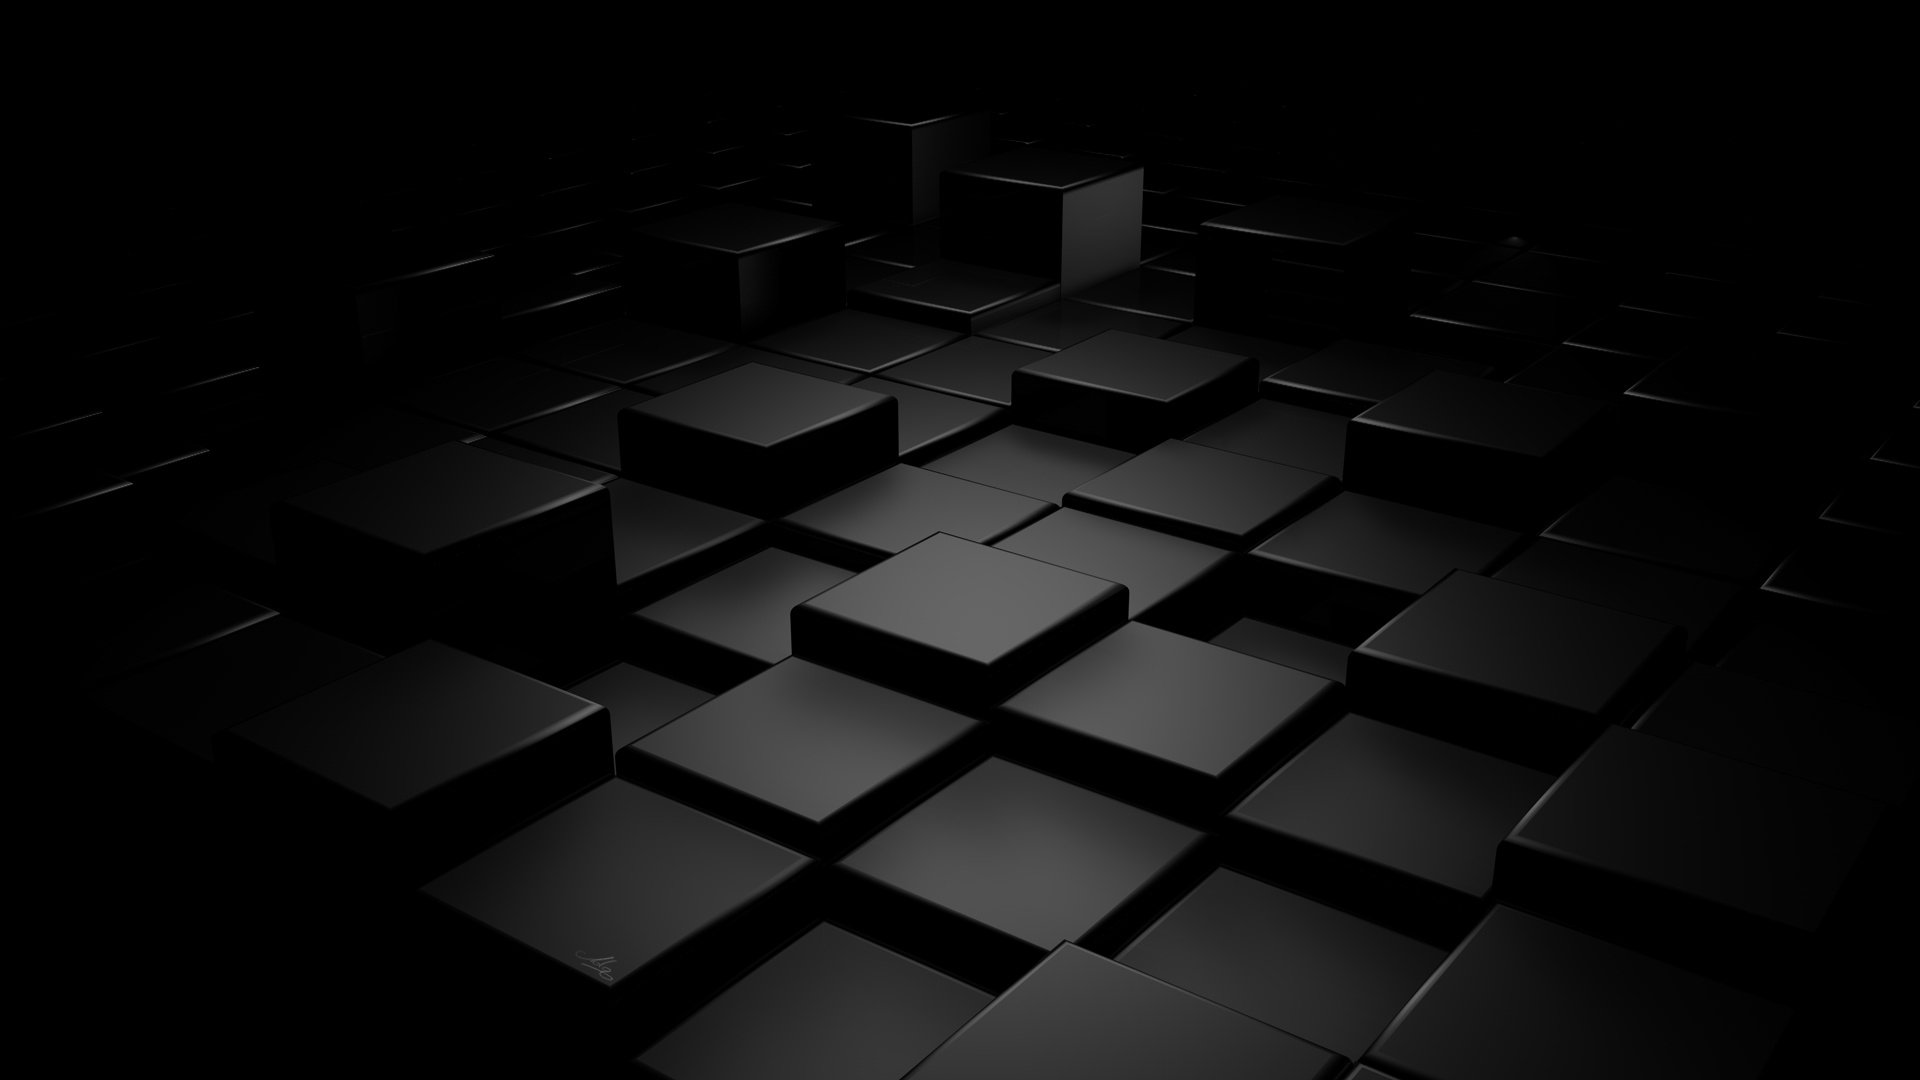 Black Background Images   HD Wallpapers Backgrounds of